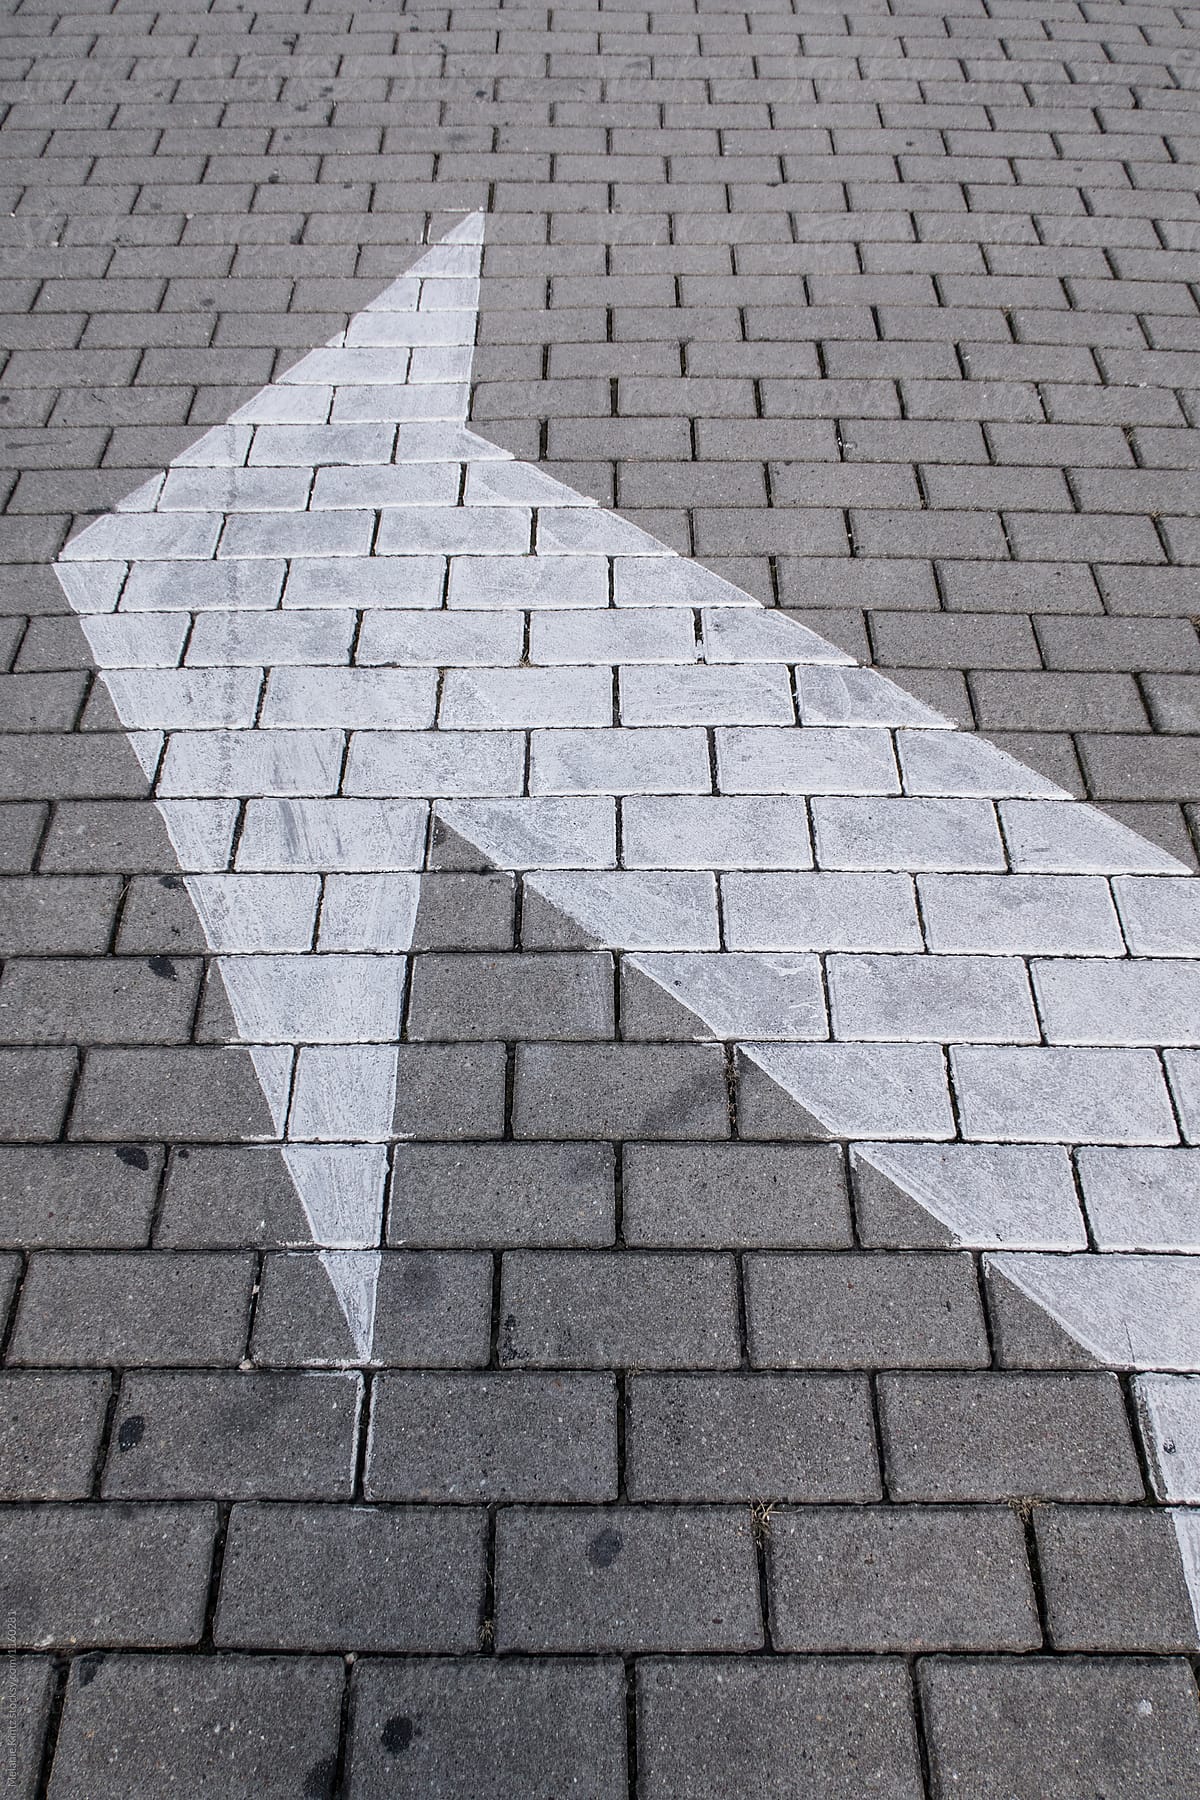 Arrow on pavement pointing to left side